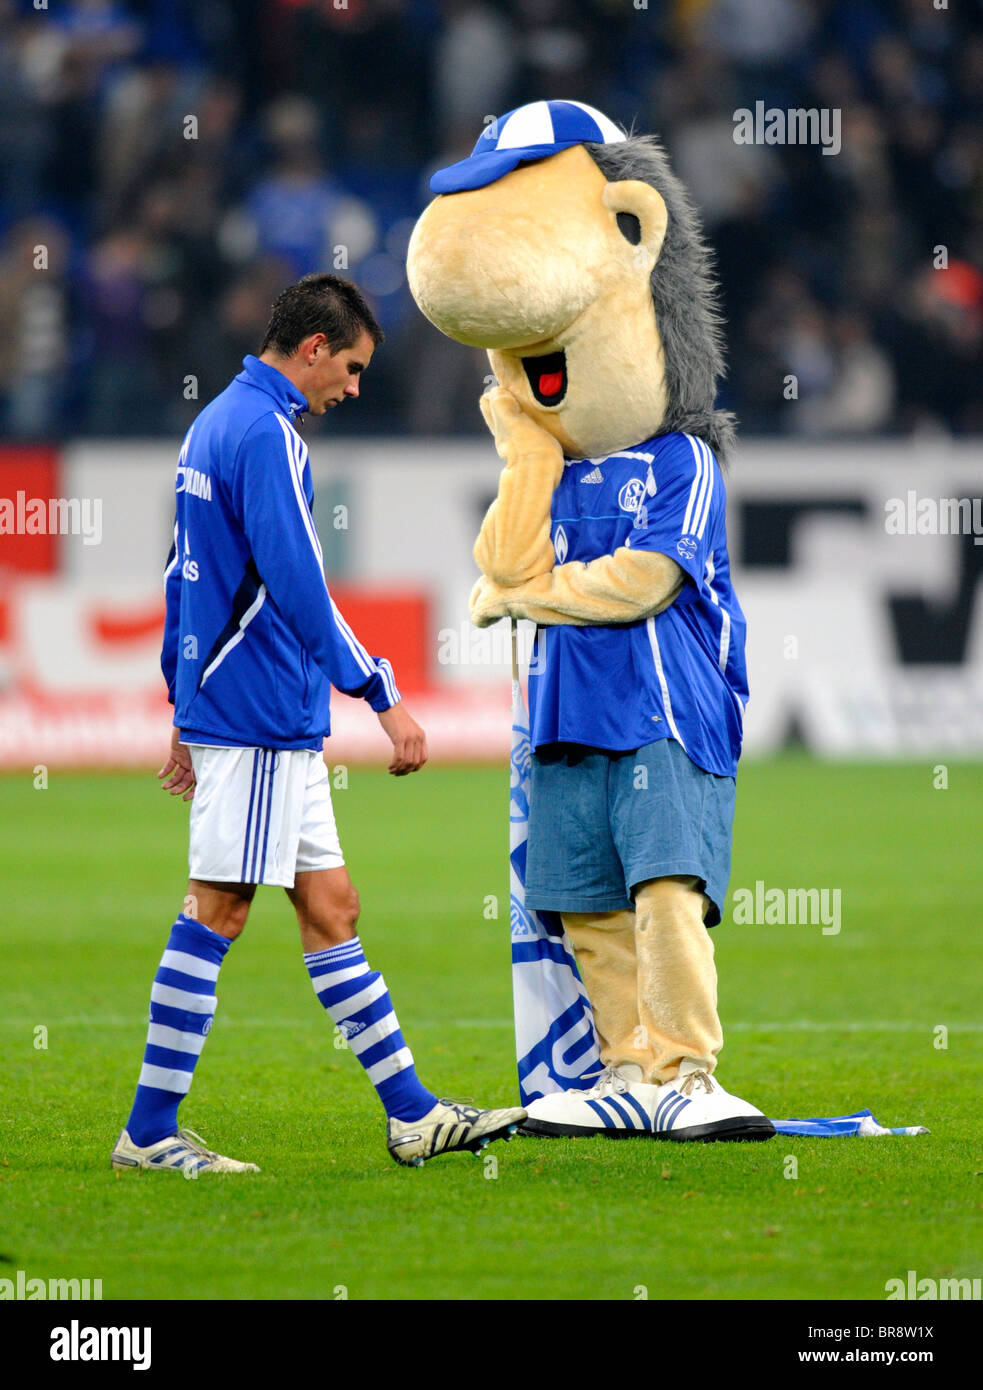 Christop Moritz and Erwin the mascot of Schalke, frustrated after the match. Stock Photo